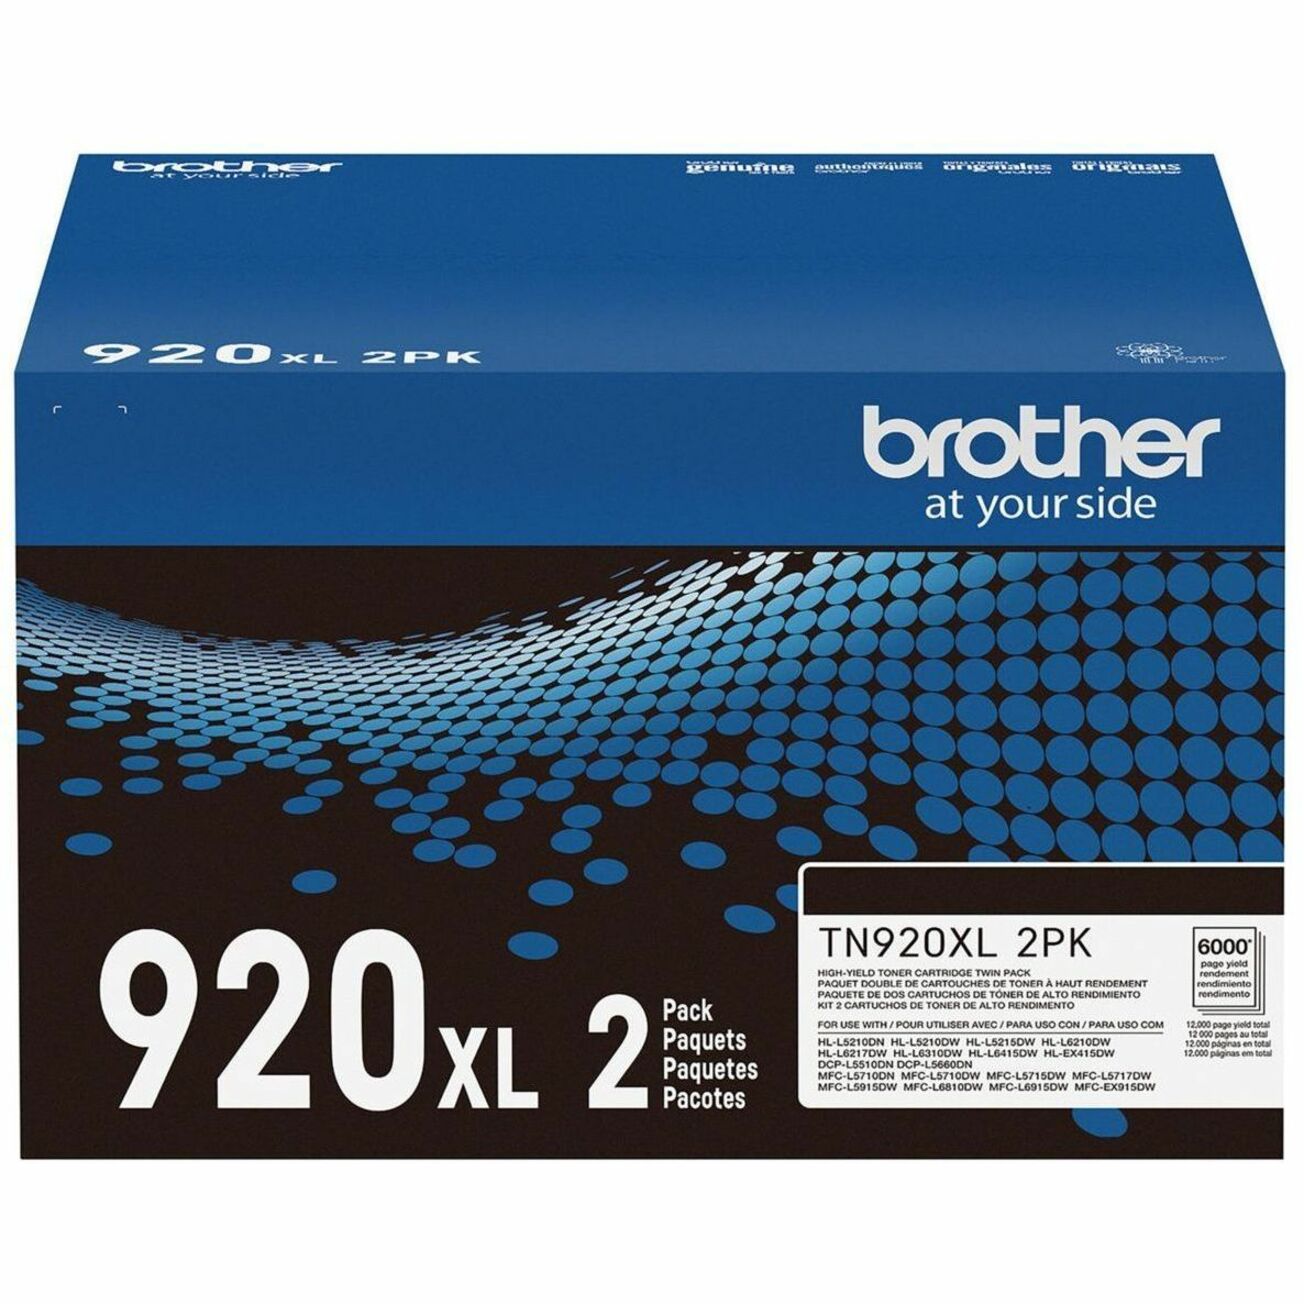 Brother TN920XL2PK High-yield Toner Cartridge Twin Pack, Black, 6000 Pages